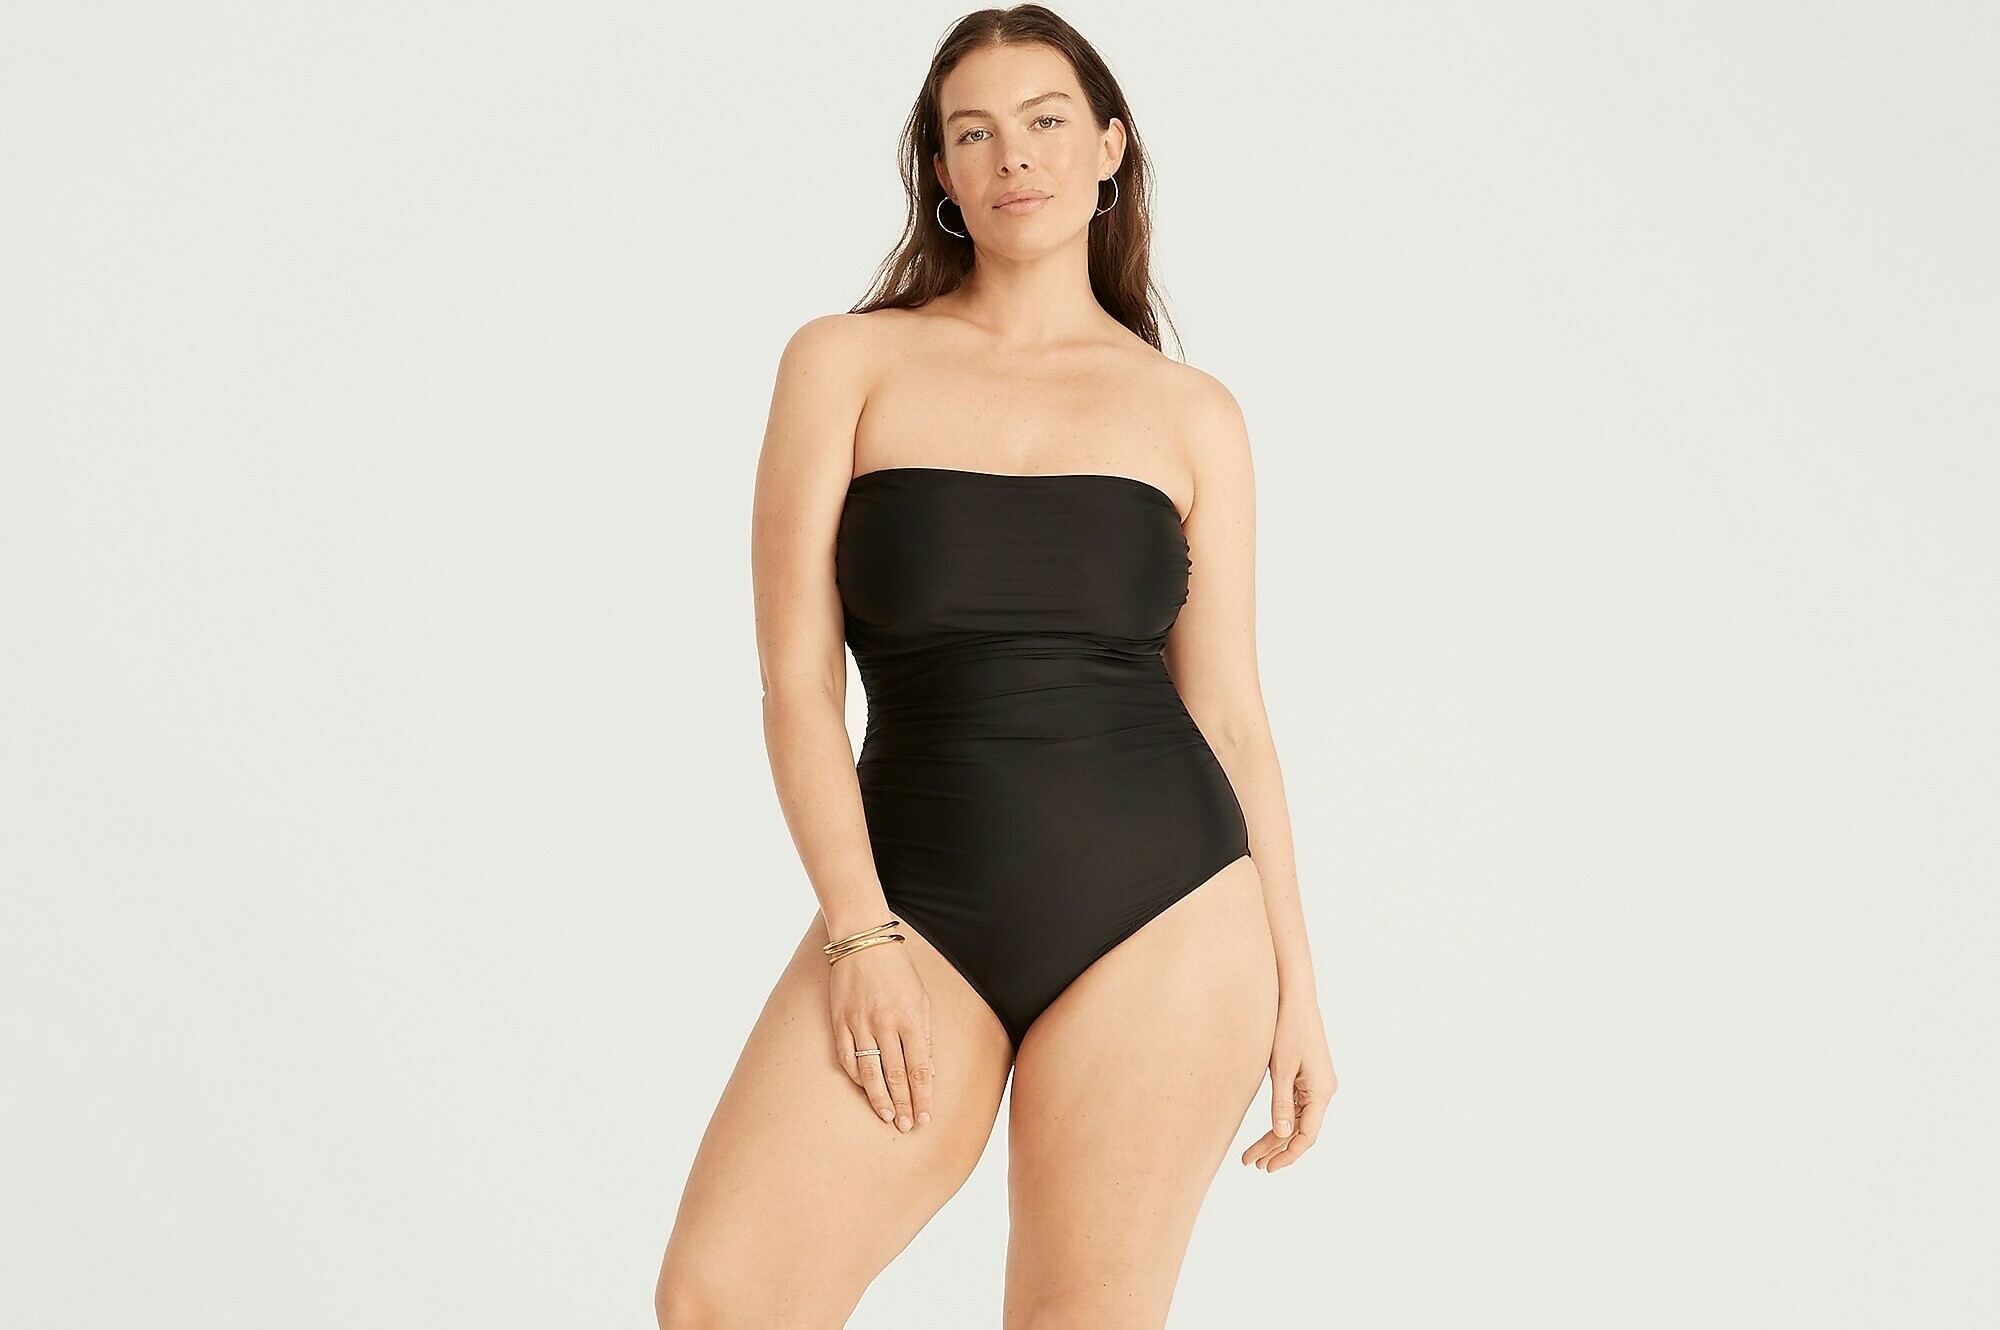 A woman is standing and wearing a one-piece swimsuit.